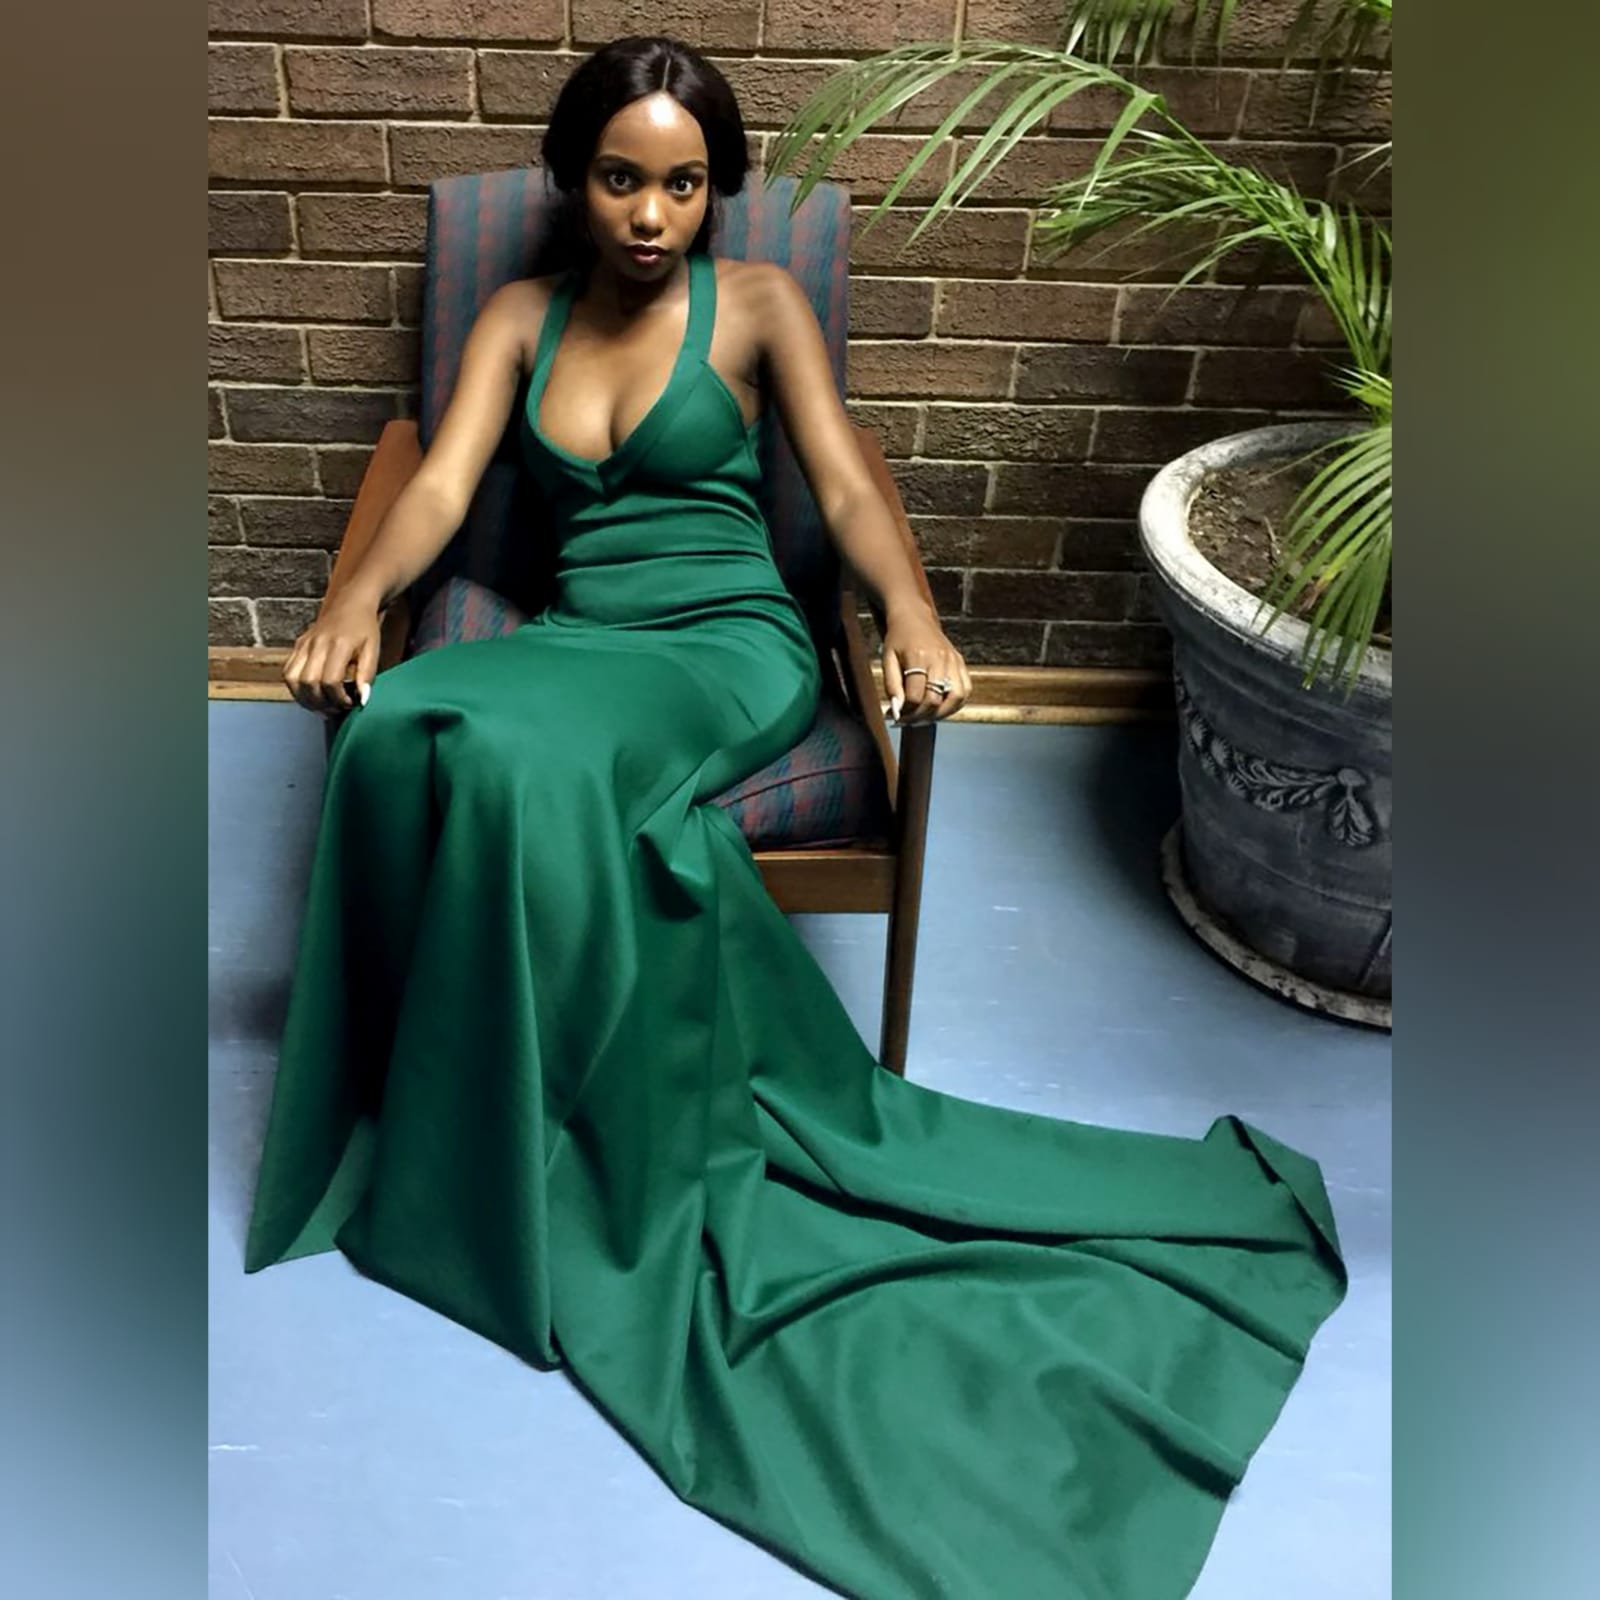 Emerald green soft mermaid matric farewell dress 3 emerald green soft mermaid matric farewell dress, with a v neckline, low open v back with pleated detail and crossed straps, with a train.